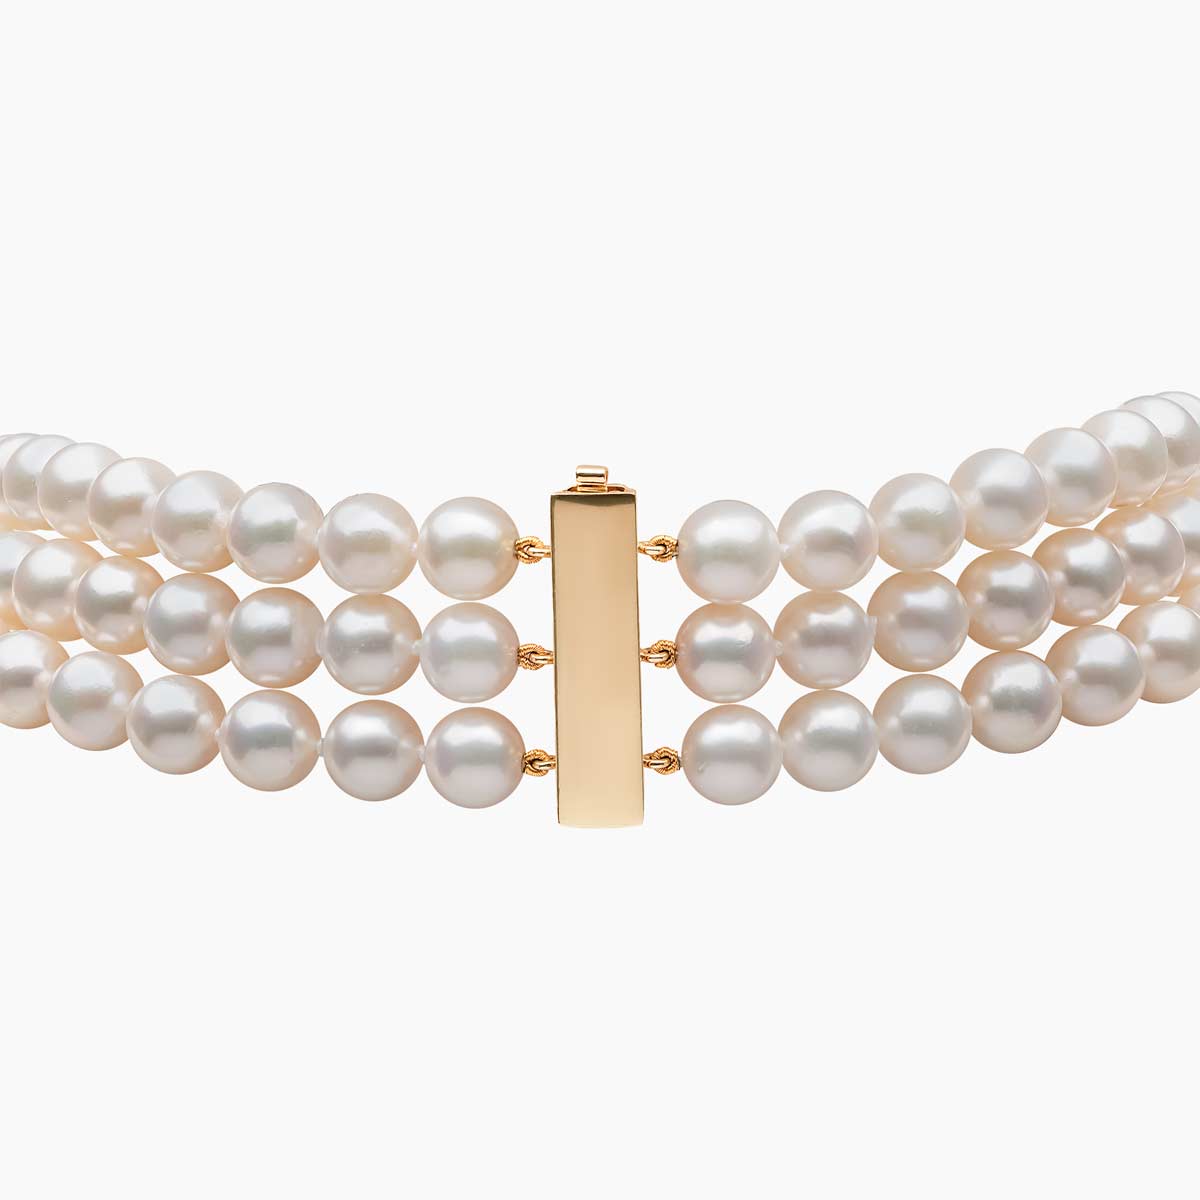 Ombré 18K Golden South Sea and Akoya Pearl Necklace